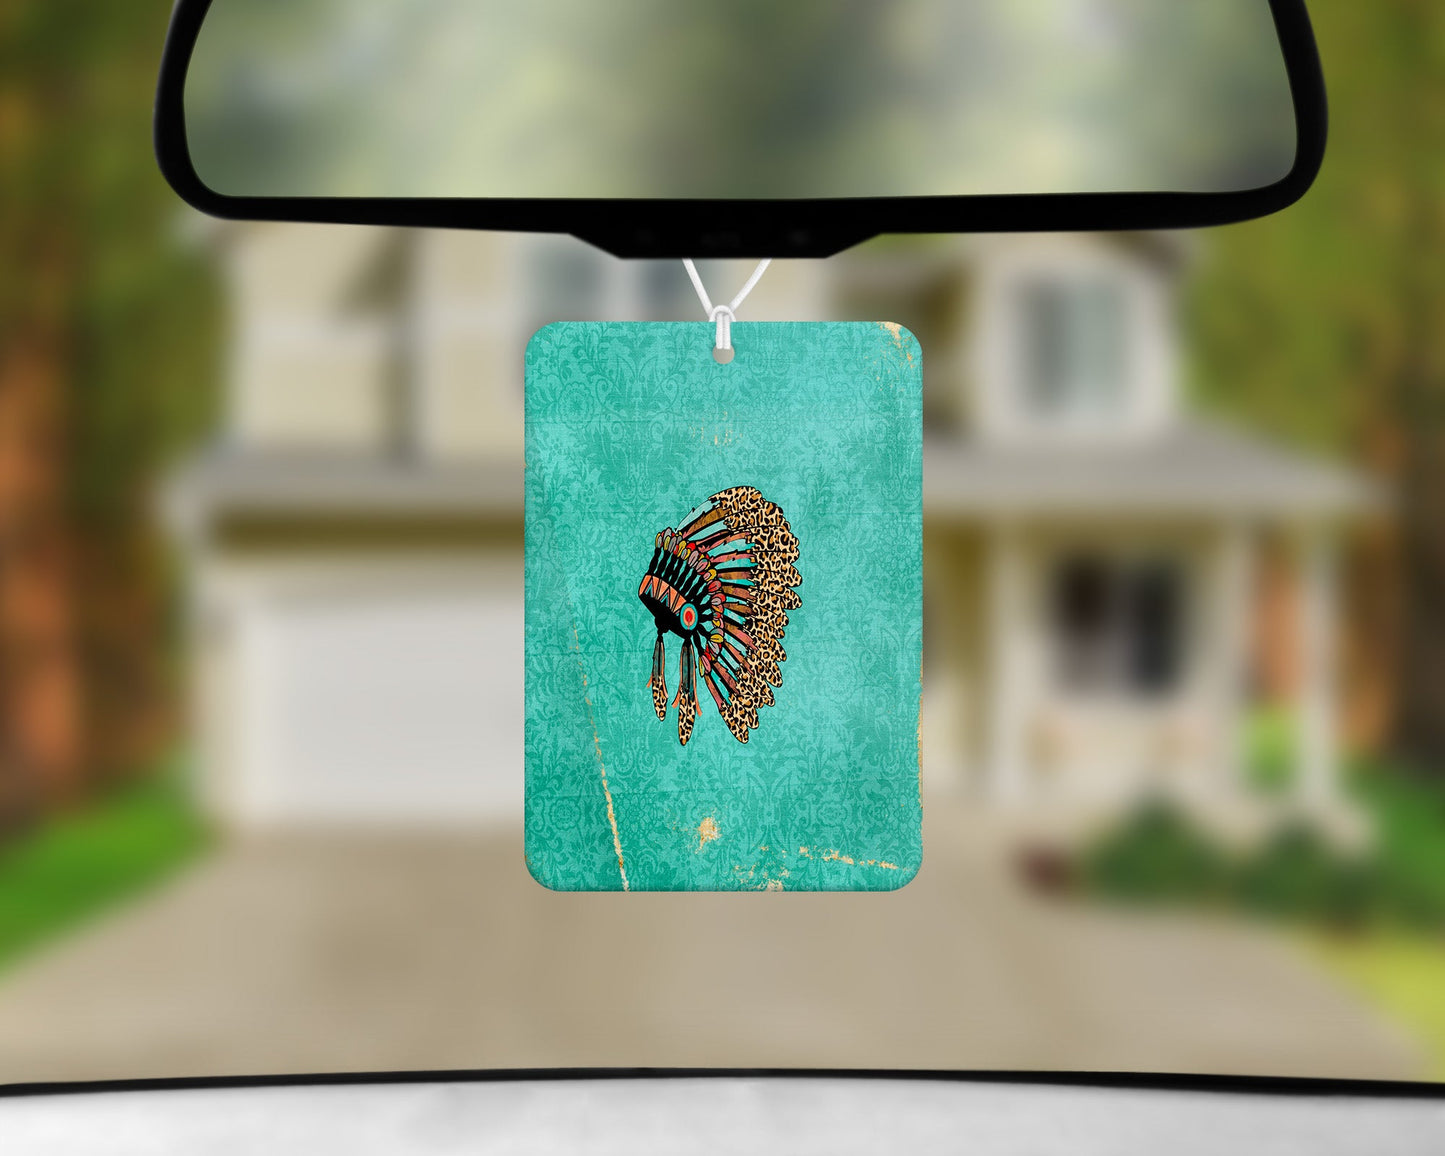 Distressed Turquoise Headdress|Freshie|Includes Scent Bottle - Vehicle Air Freshener